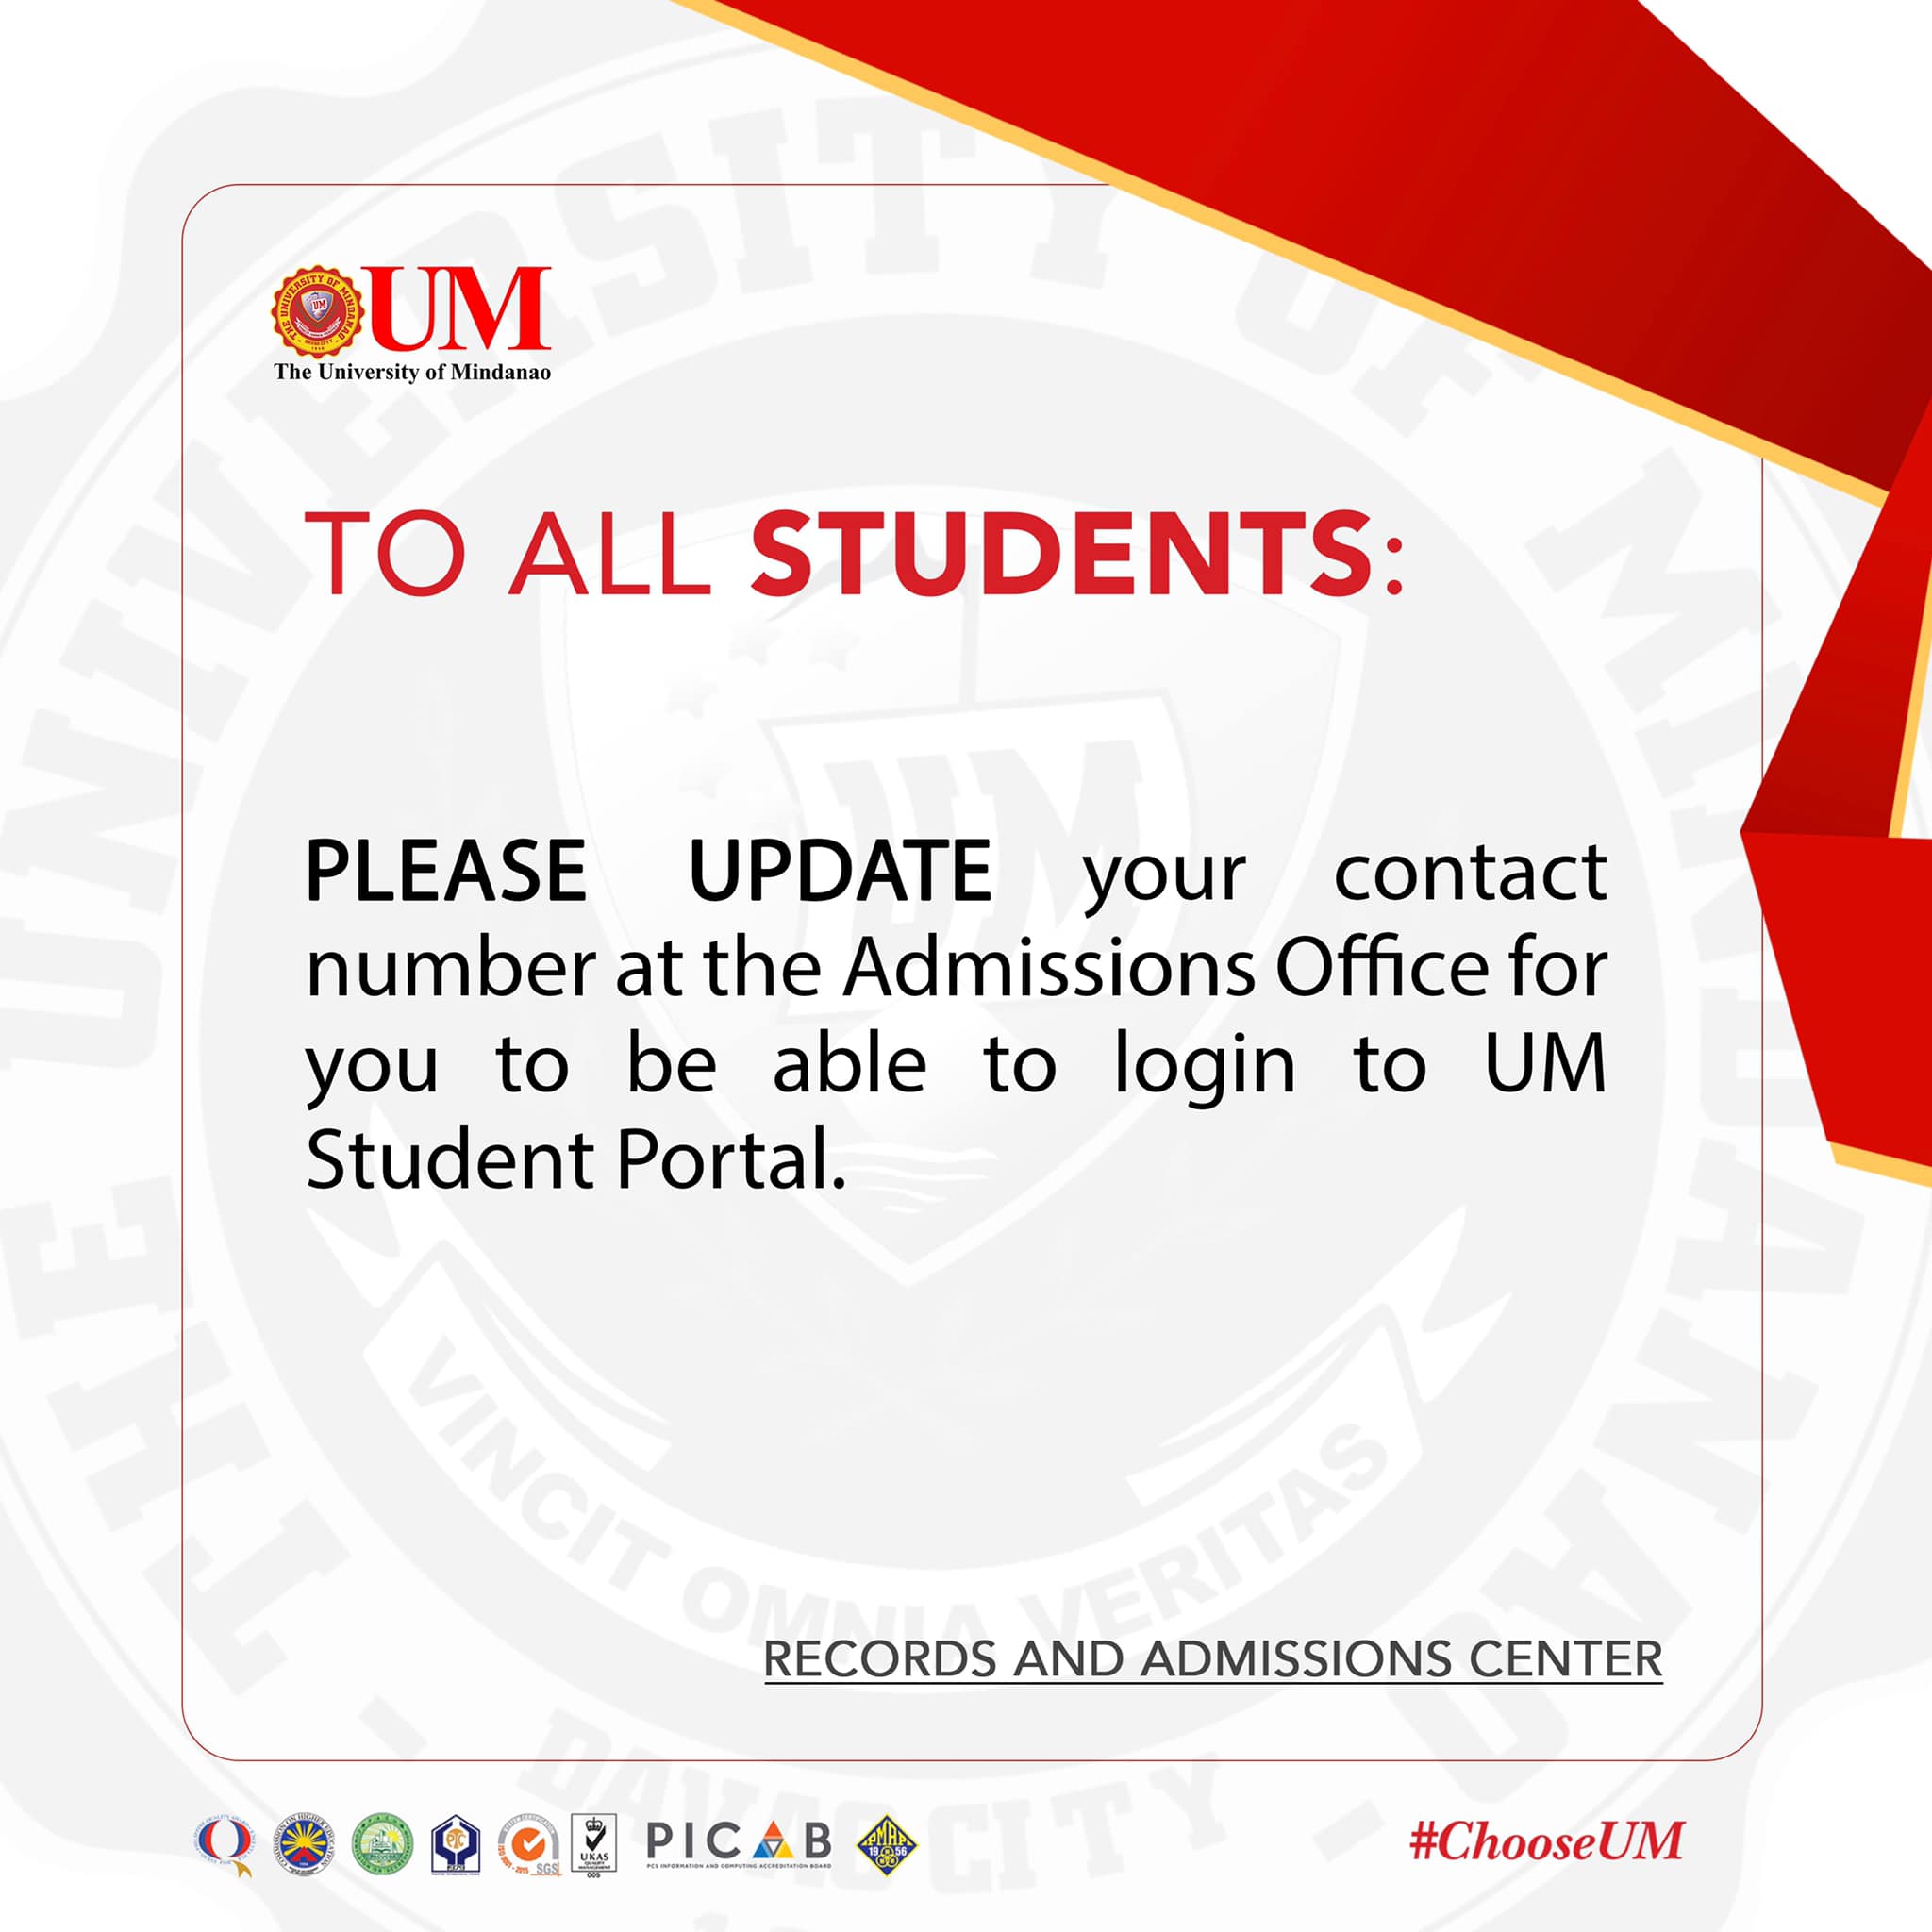 Advisory from the Records and Admission Center